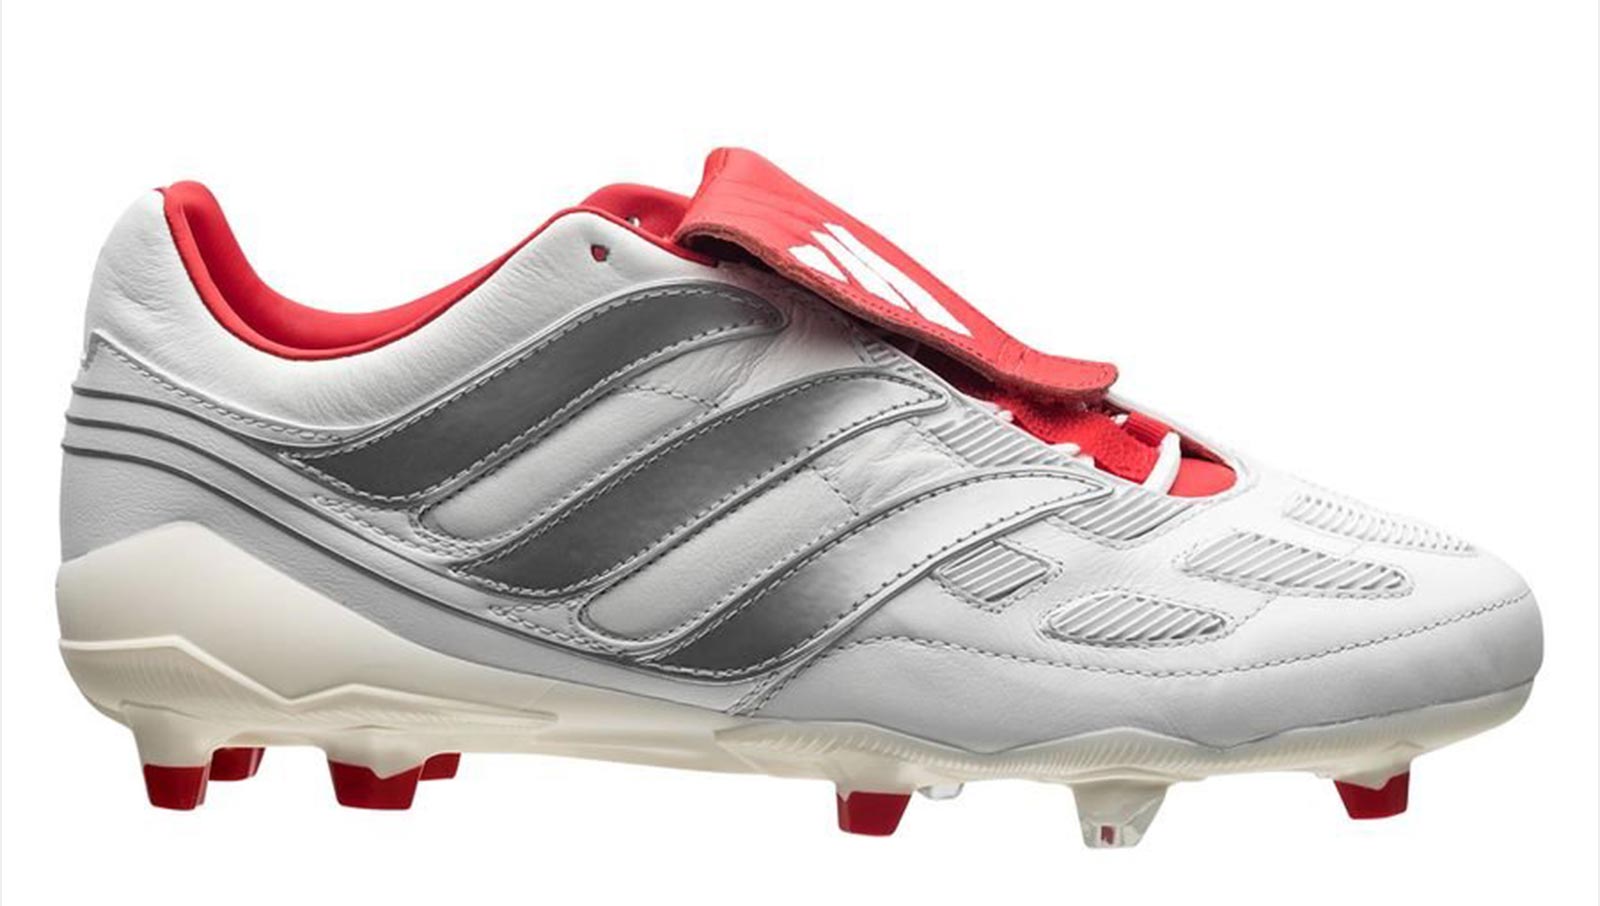 7 Remakes Since 2017 - Here Are All 11 Adidas Predator Remake Boots ...